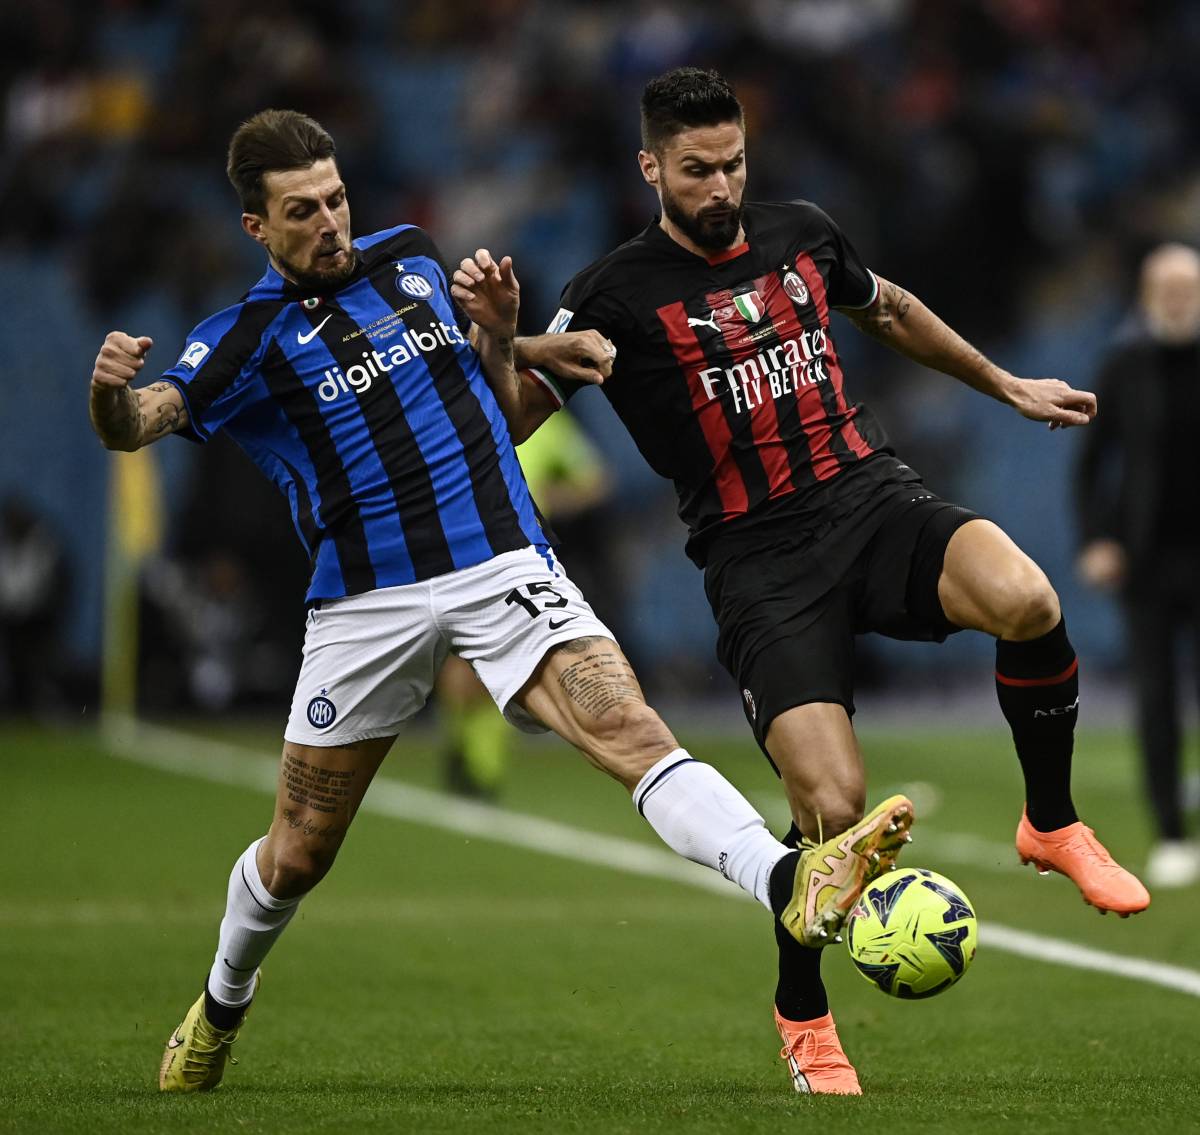 Inter – Milan: Forecast and bet on the match from Pavel Zanozin